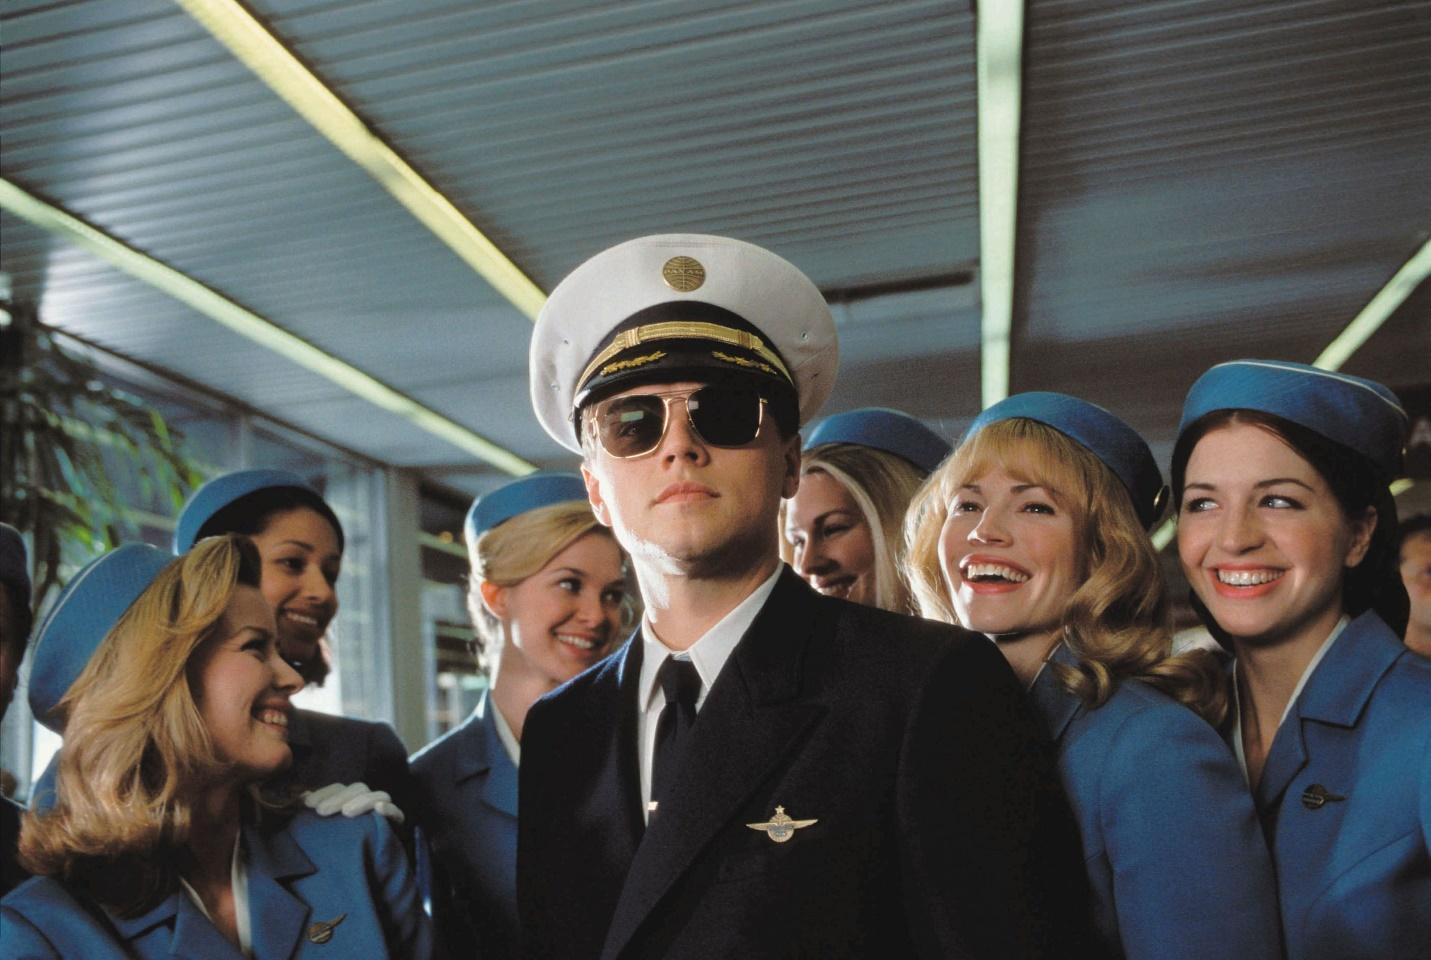 Catch Me If You Can Is Not a True Story - A New Book Says Frank Abagnale  Lied About His Cons